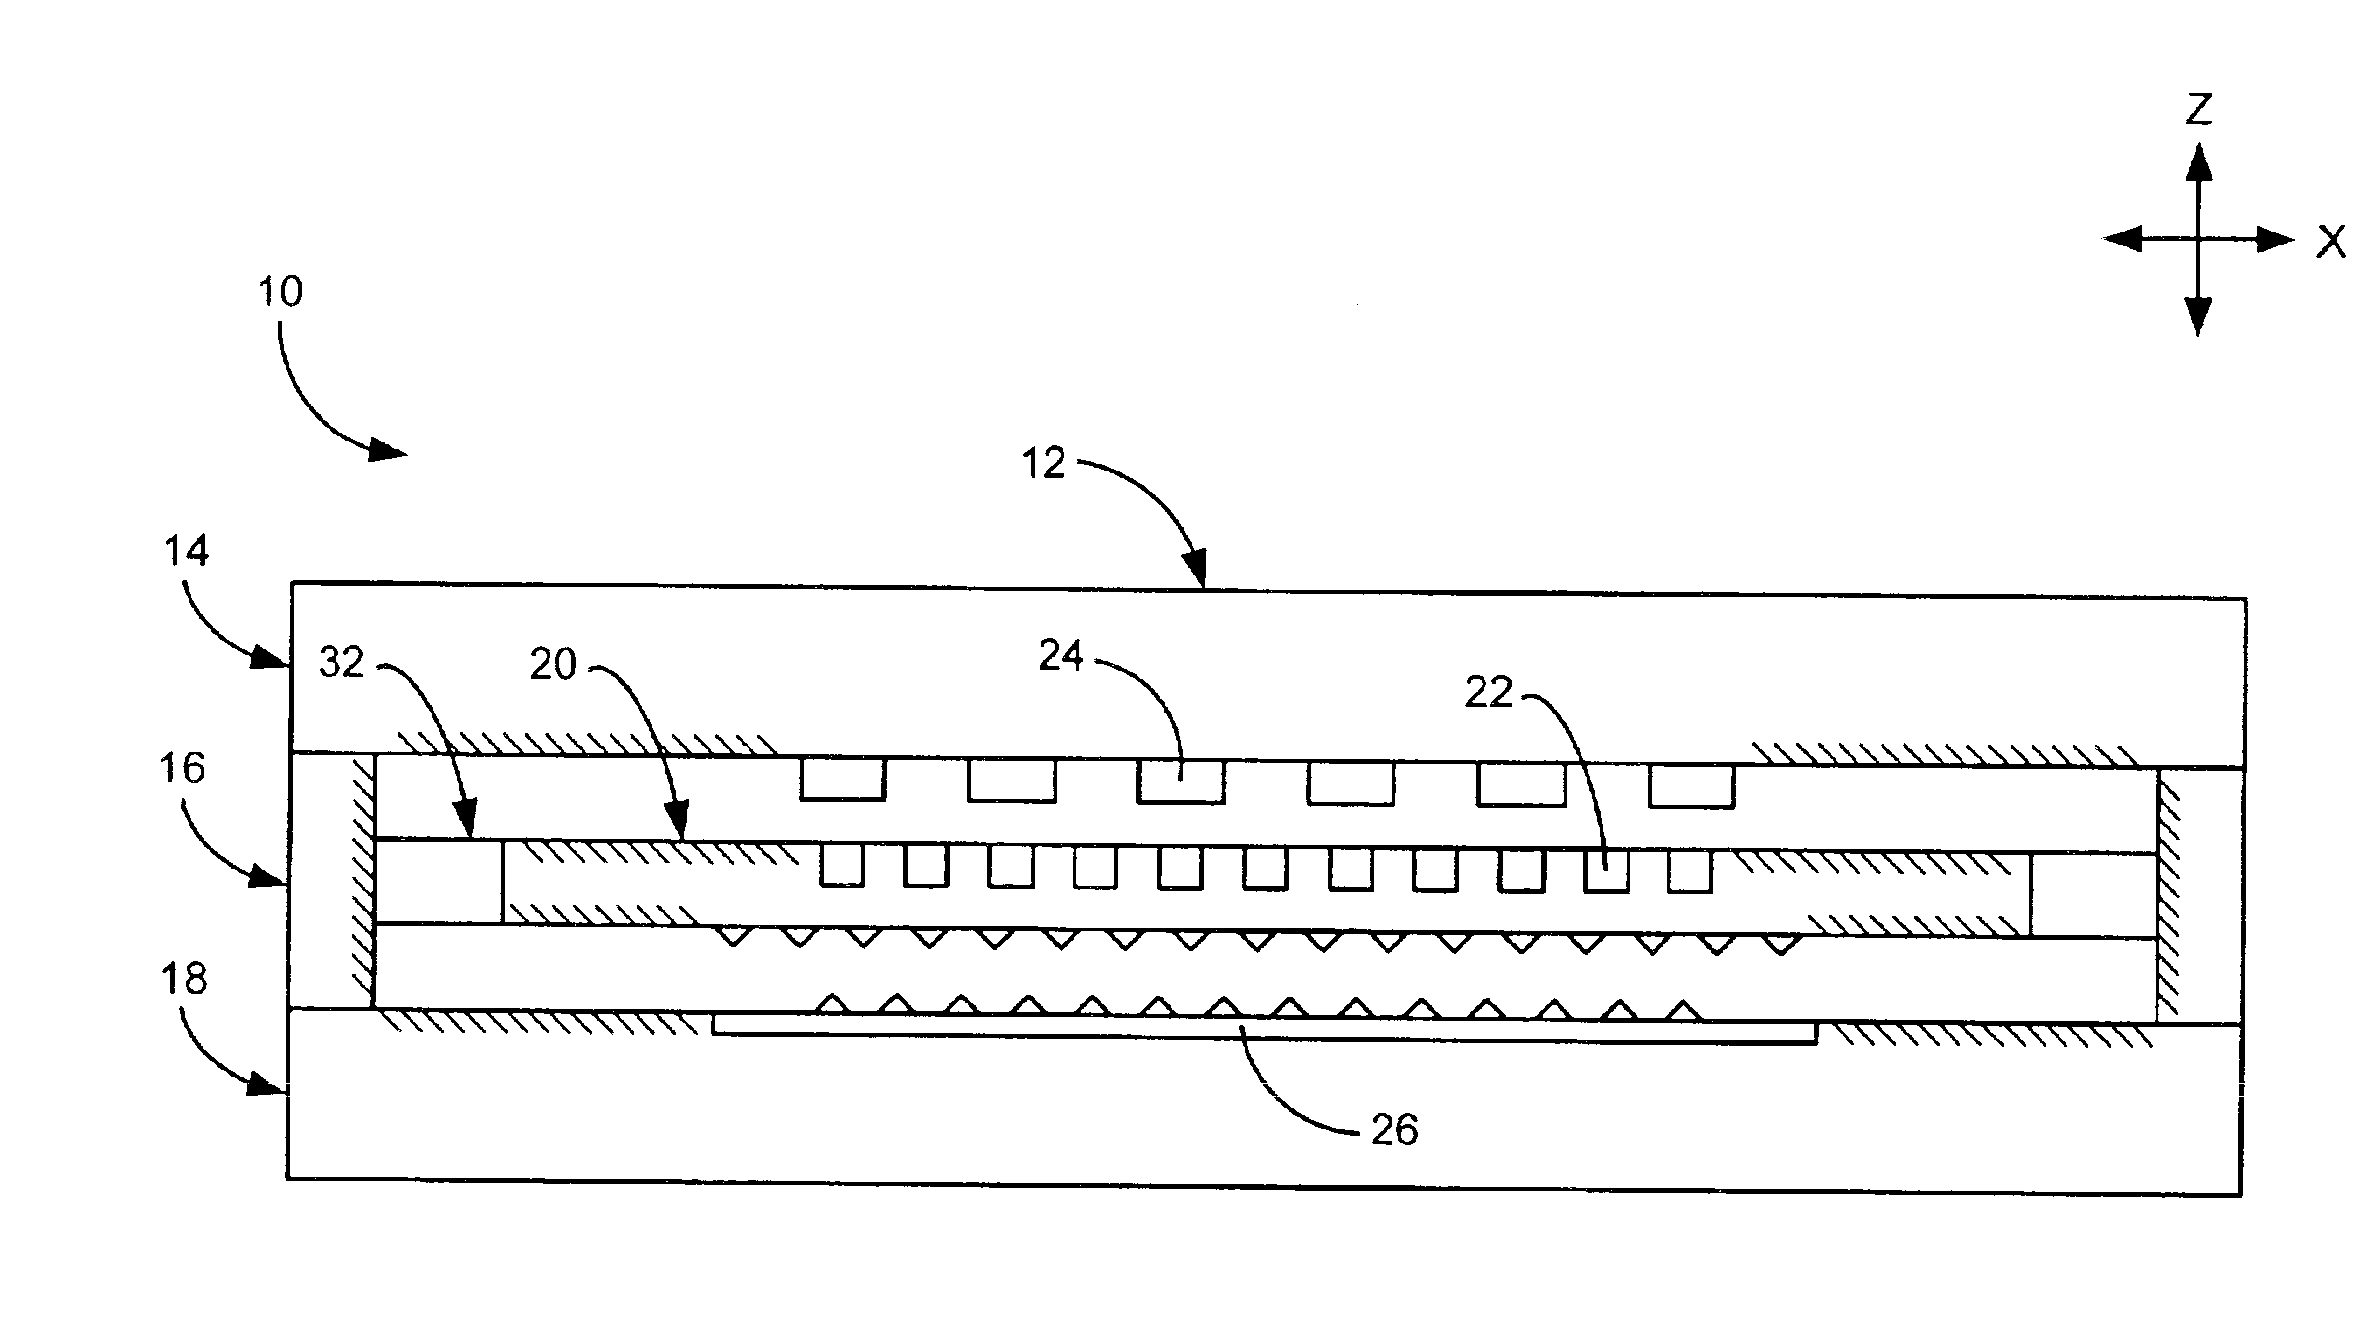 Movable micro-electromechanical device